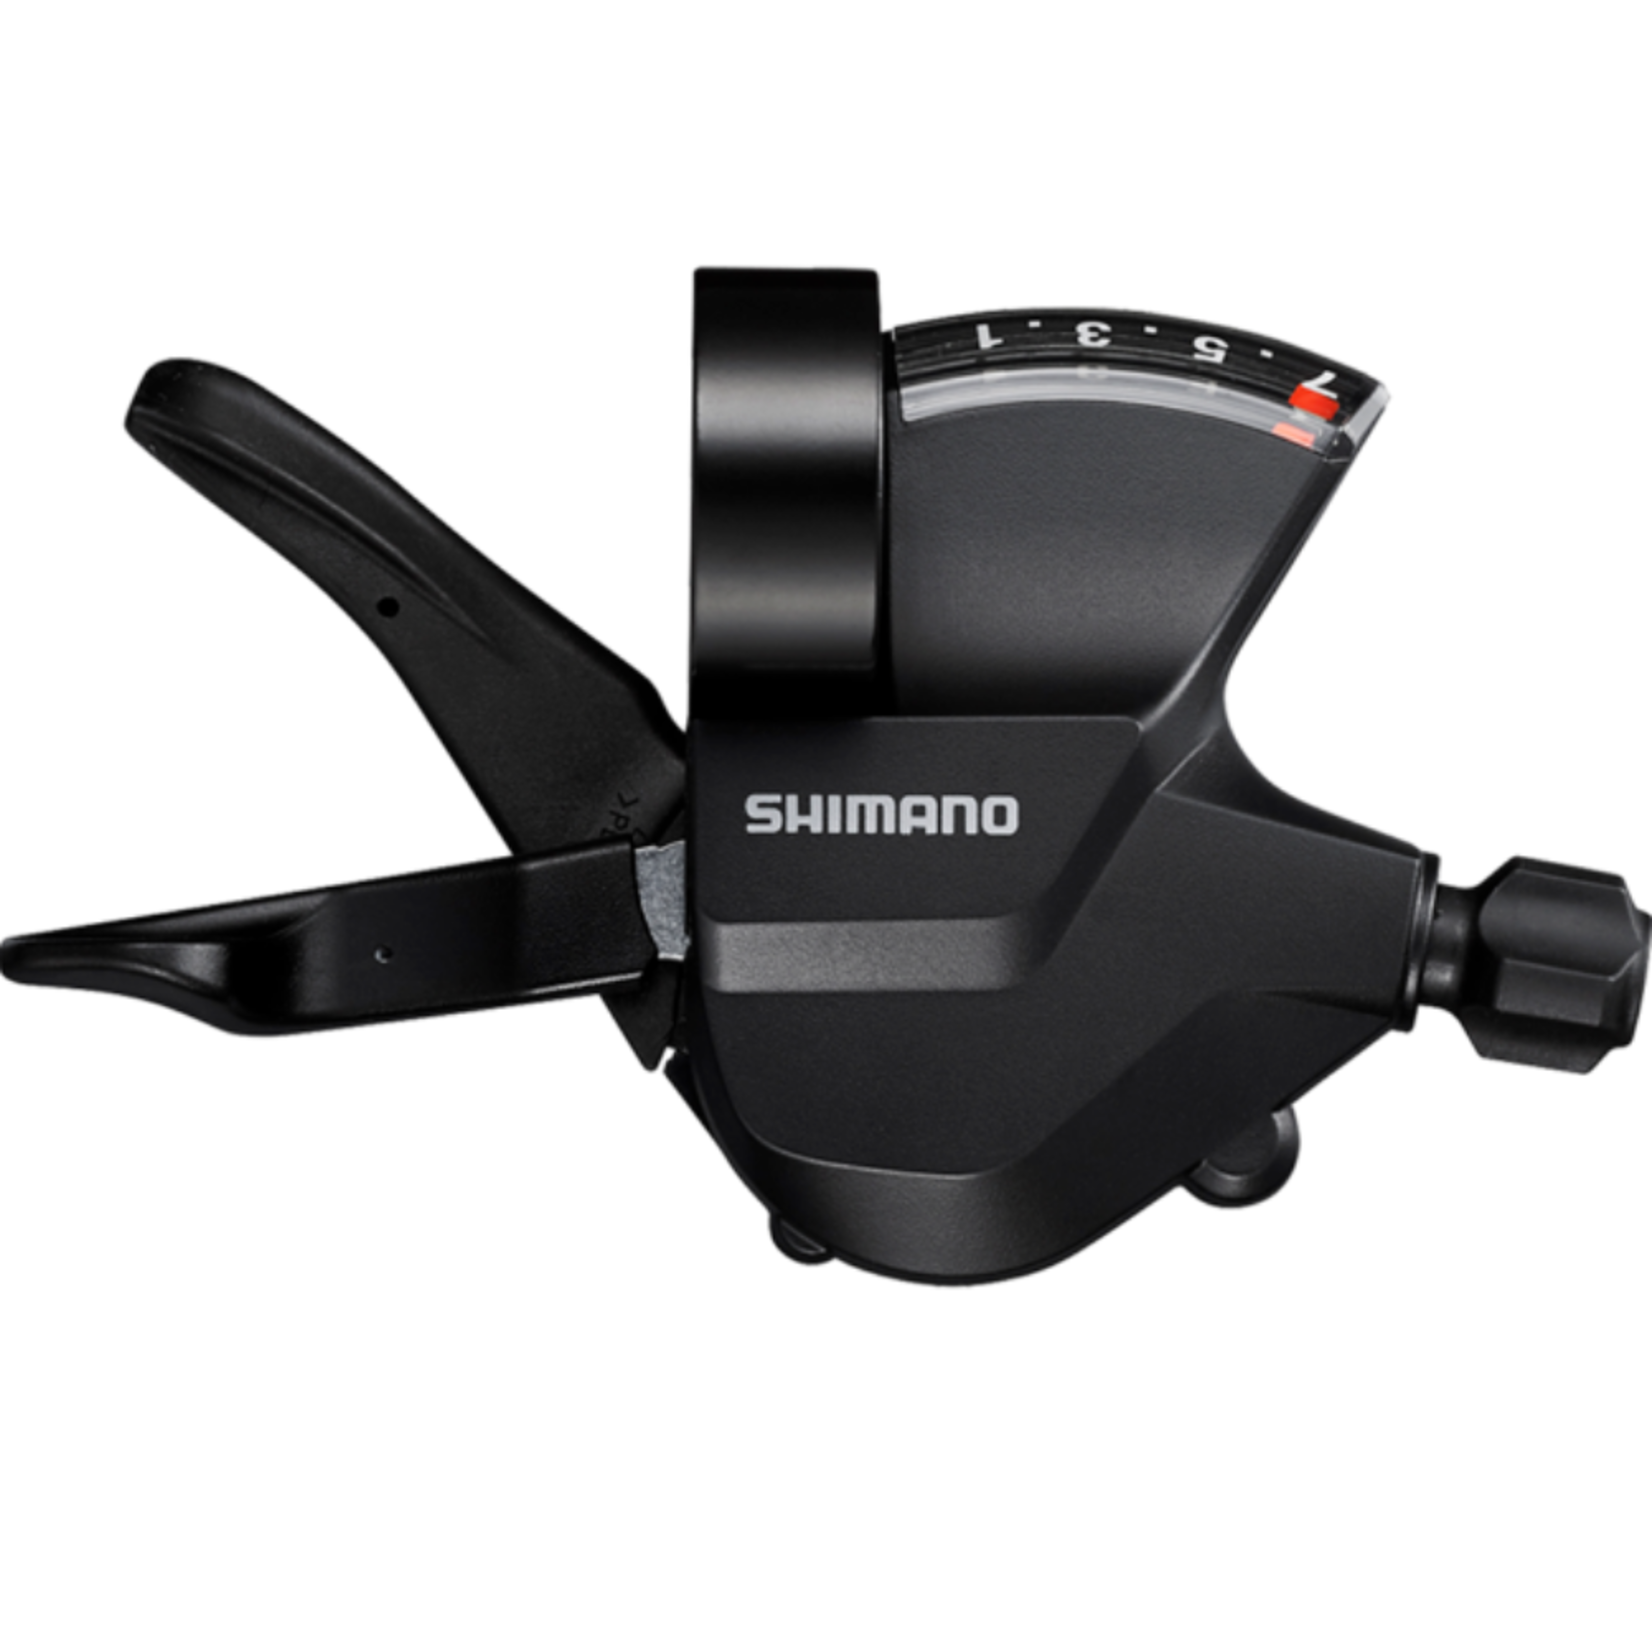 Shimano SHIFT LEVER, SL-M315-7R, RIGHT, 7-SPEED RAPIDFIRE PLUS, W/ OPTICAL GEAR DISPLAY